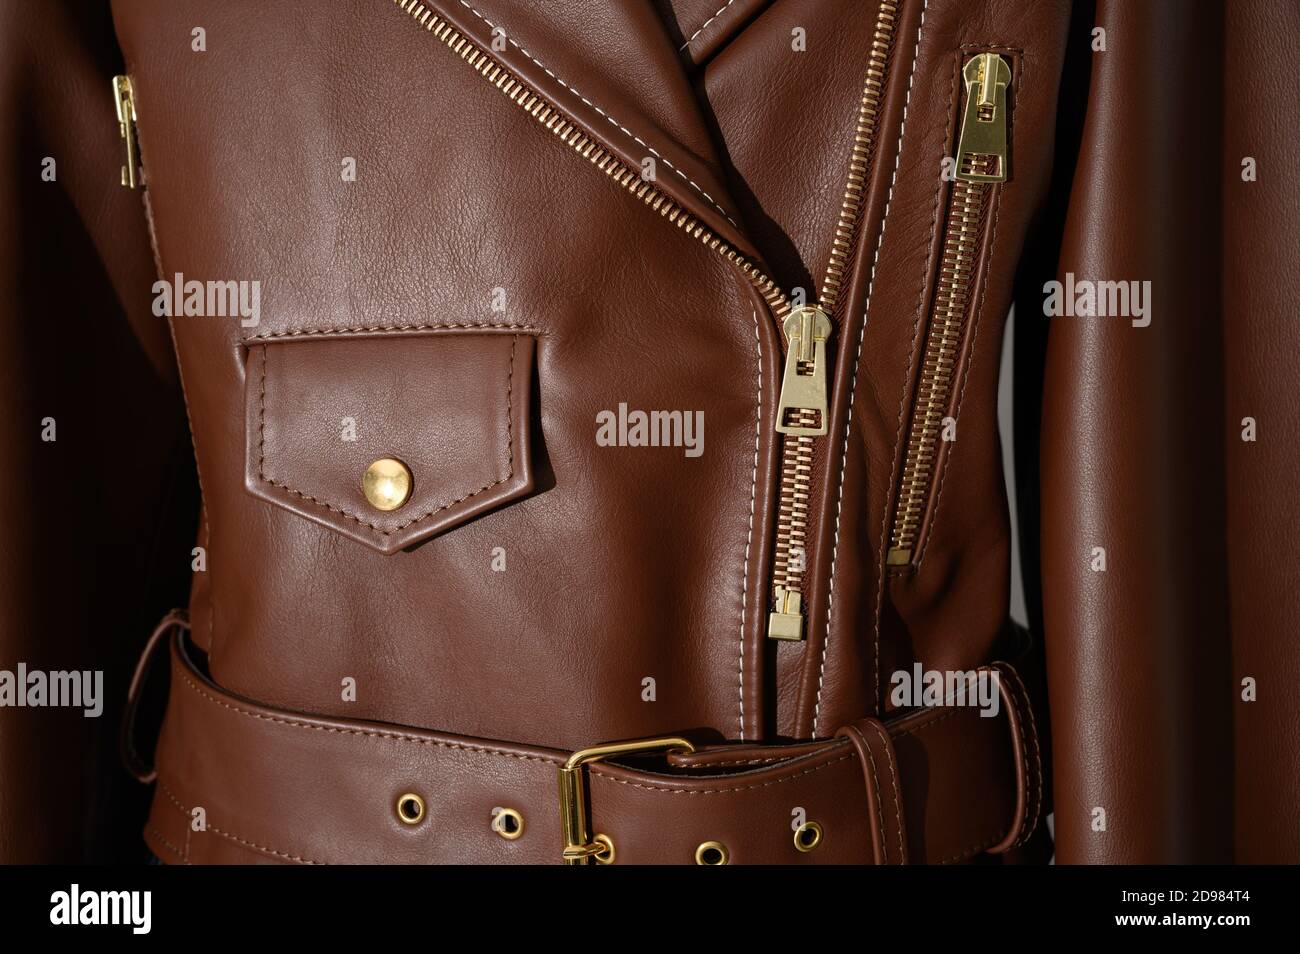 Brown leather jacket with metal zippers on it. Stitched leather. Closeup. Horizontal fashion background. Stock Photo